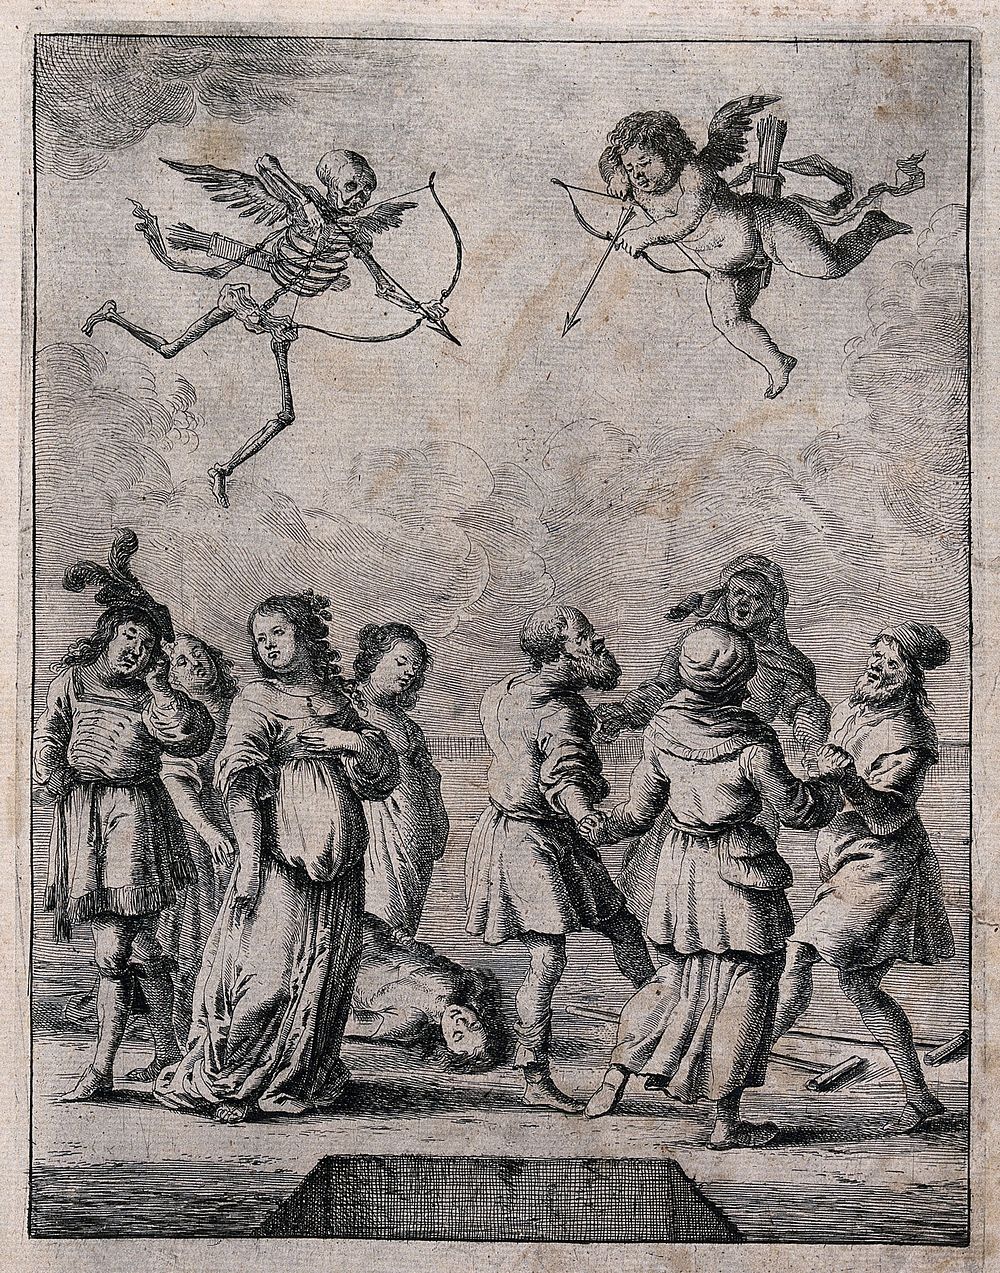 A young figure lies dead on the ground and is surrounded by a group of figures with love and death flying above. Etching.